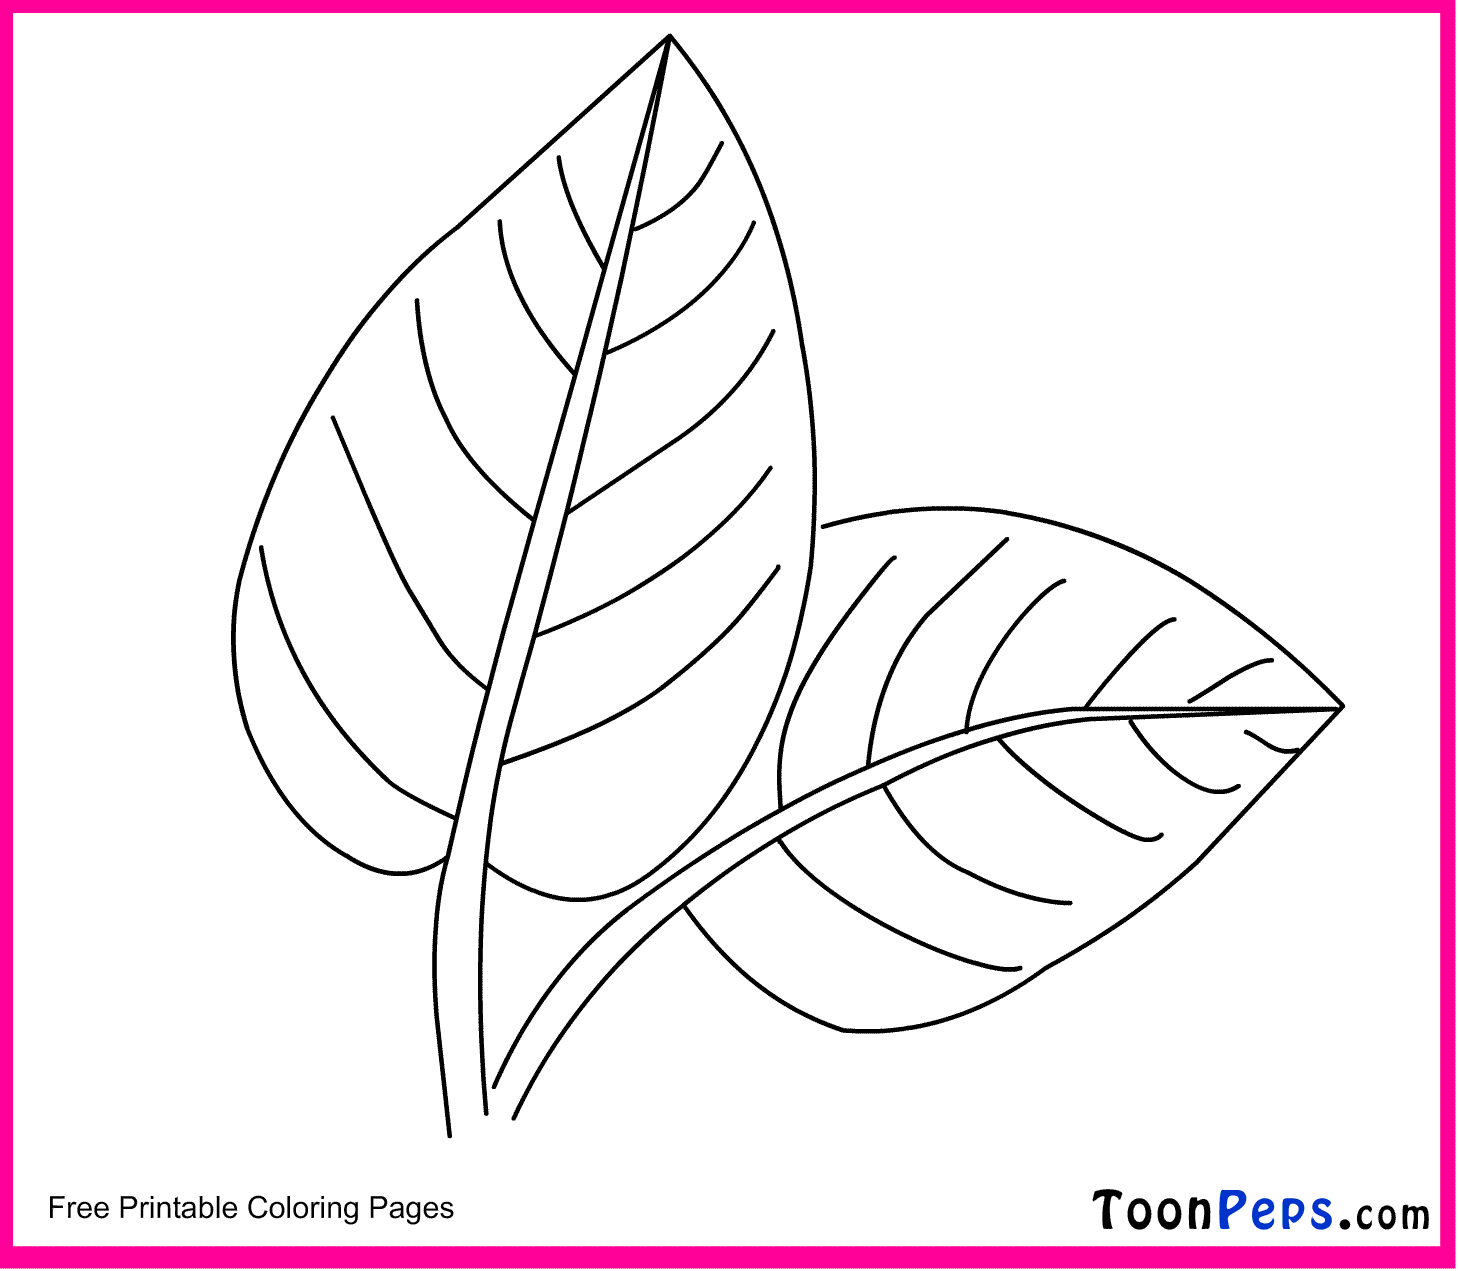 Toonpeps : Free Printable Leaf coloring pages for kids